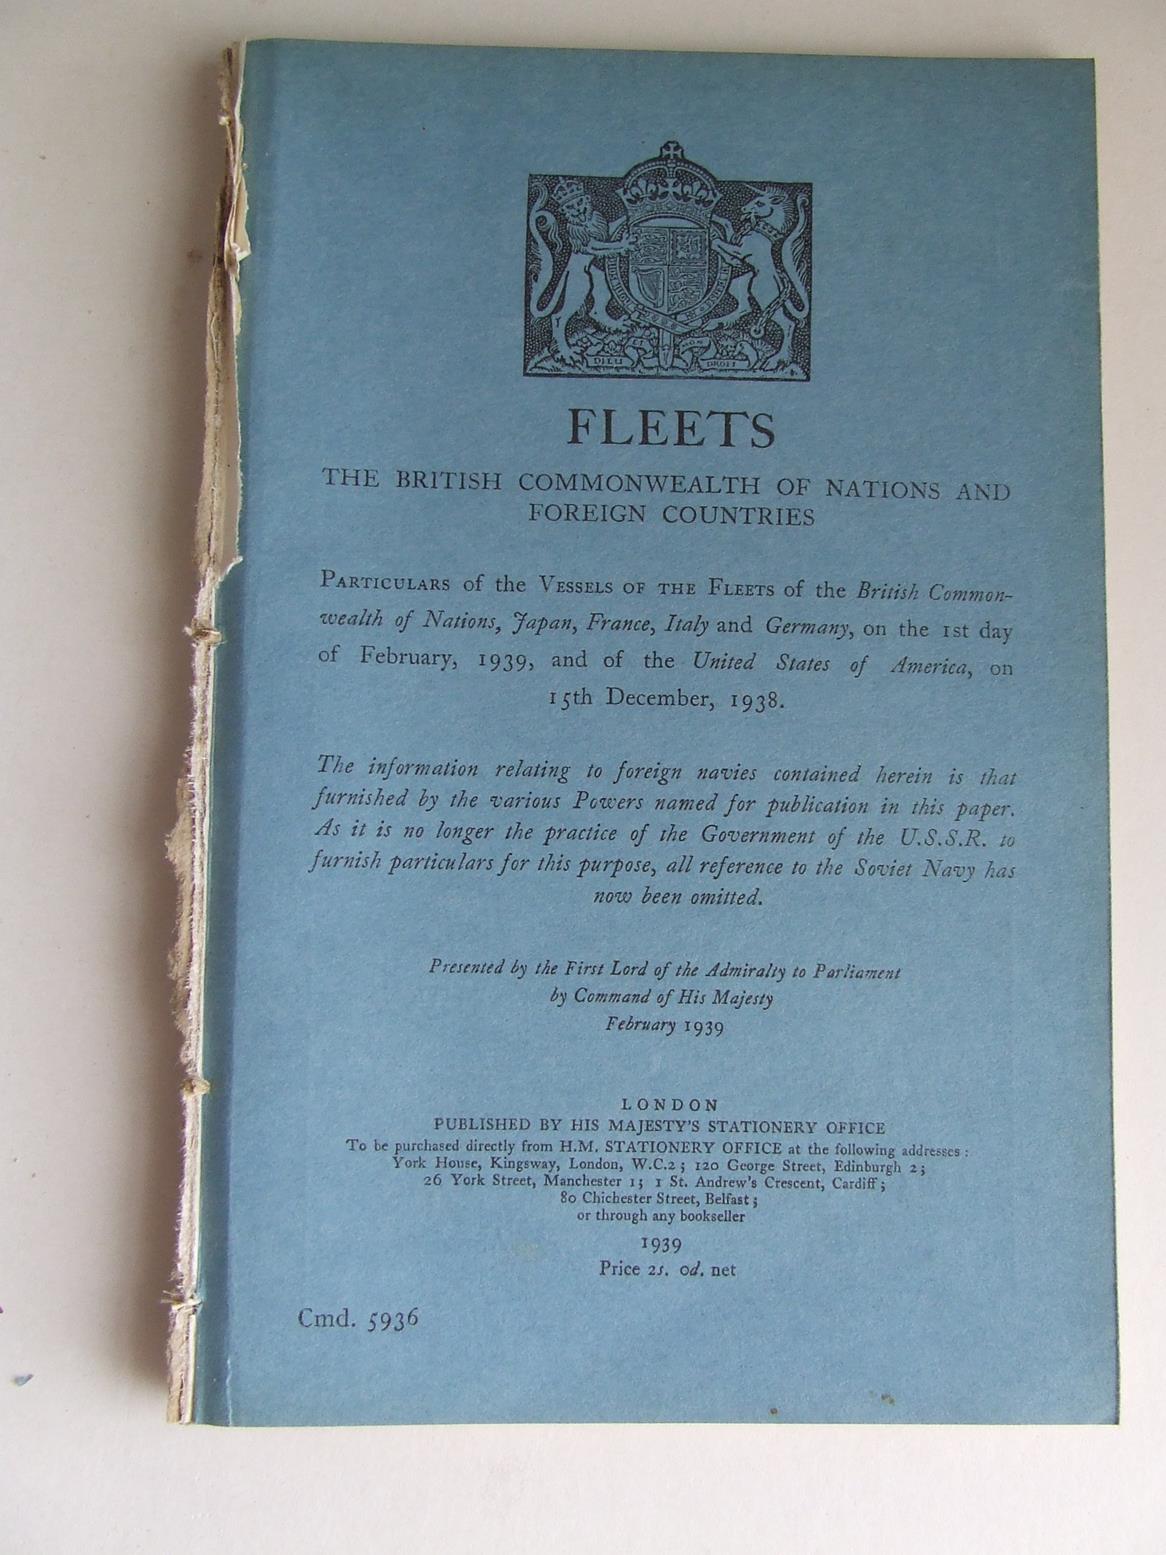 Fleets (The British Commonwealth of Nations and Foreign Countries)